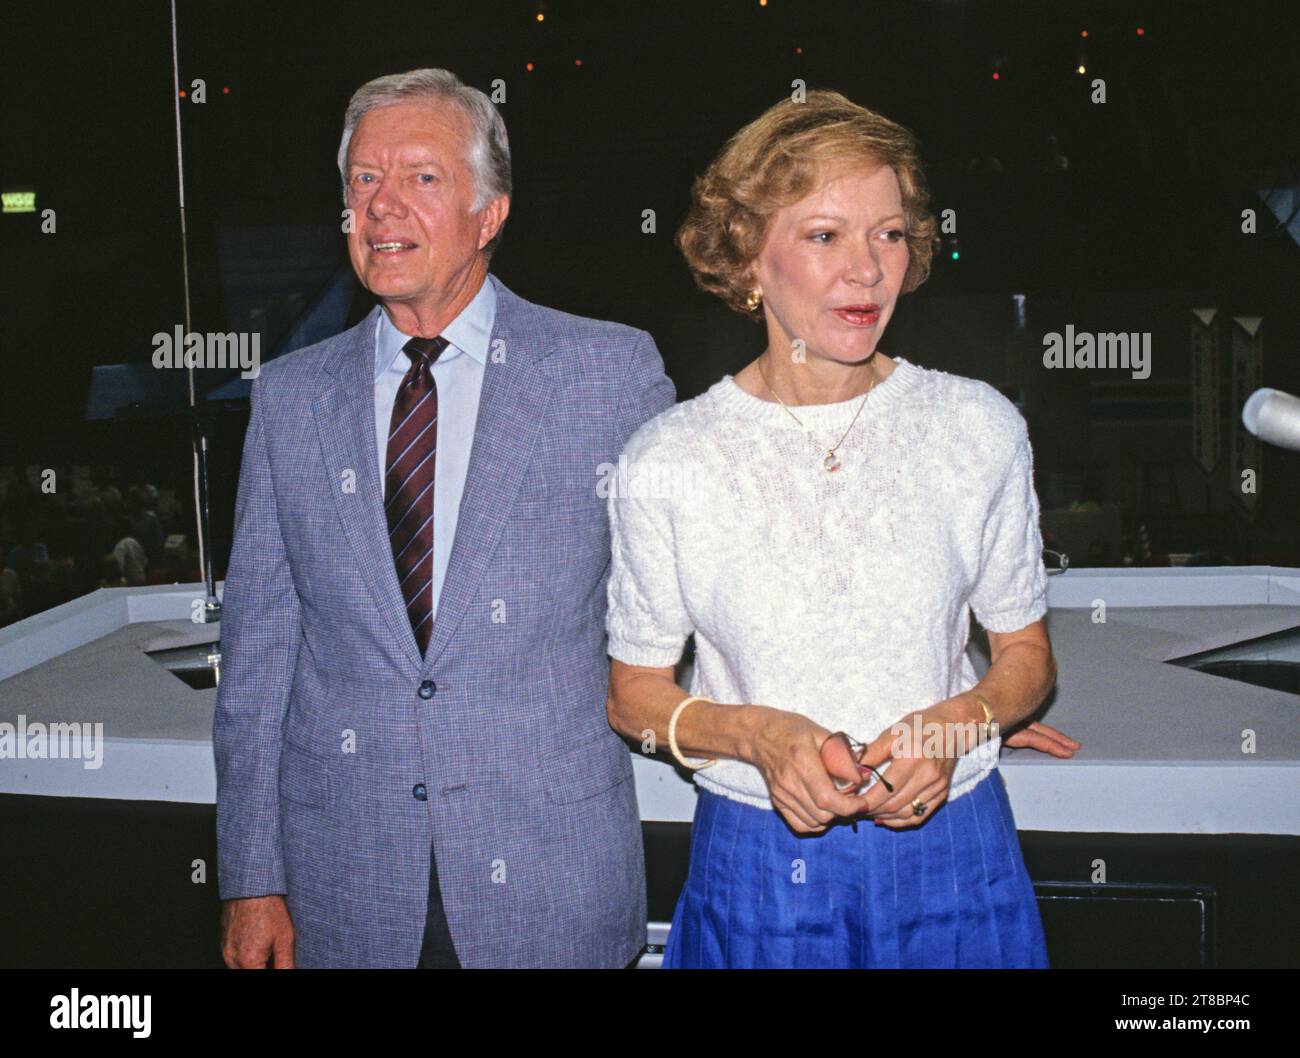 **FILE PHOTO** Rosalynn Carter Has Passed Away. Former United States President Jimmy Carter, accompanied by his wife, former first lady Rosalynn Carter, visits the Omni Coliseum in Atlanta, Georgia prior to his addressing the 1988 Democratic National Convention on July 18, 1988. Credit: Arnie Sachs/CNP /MediaPunch Stock Photo